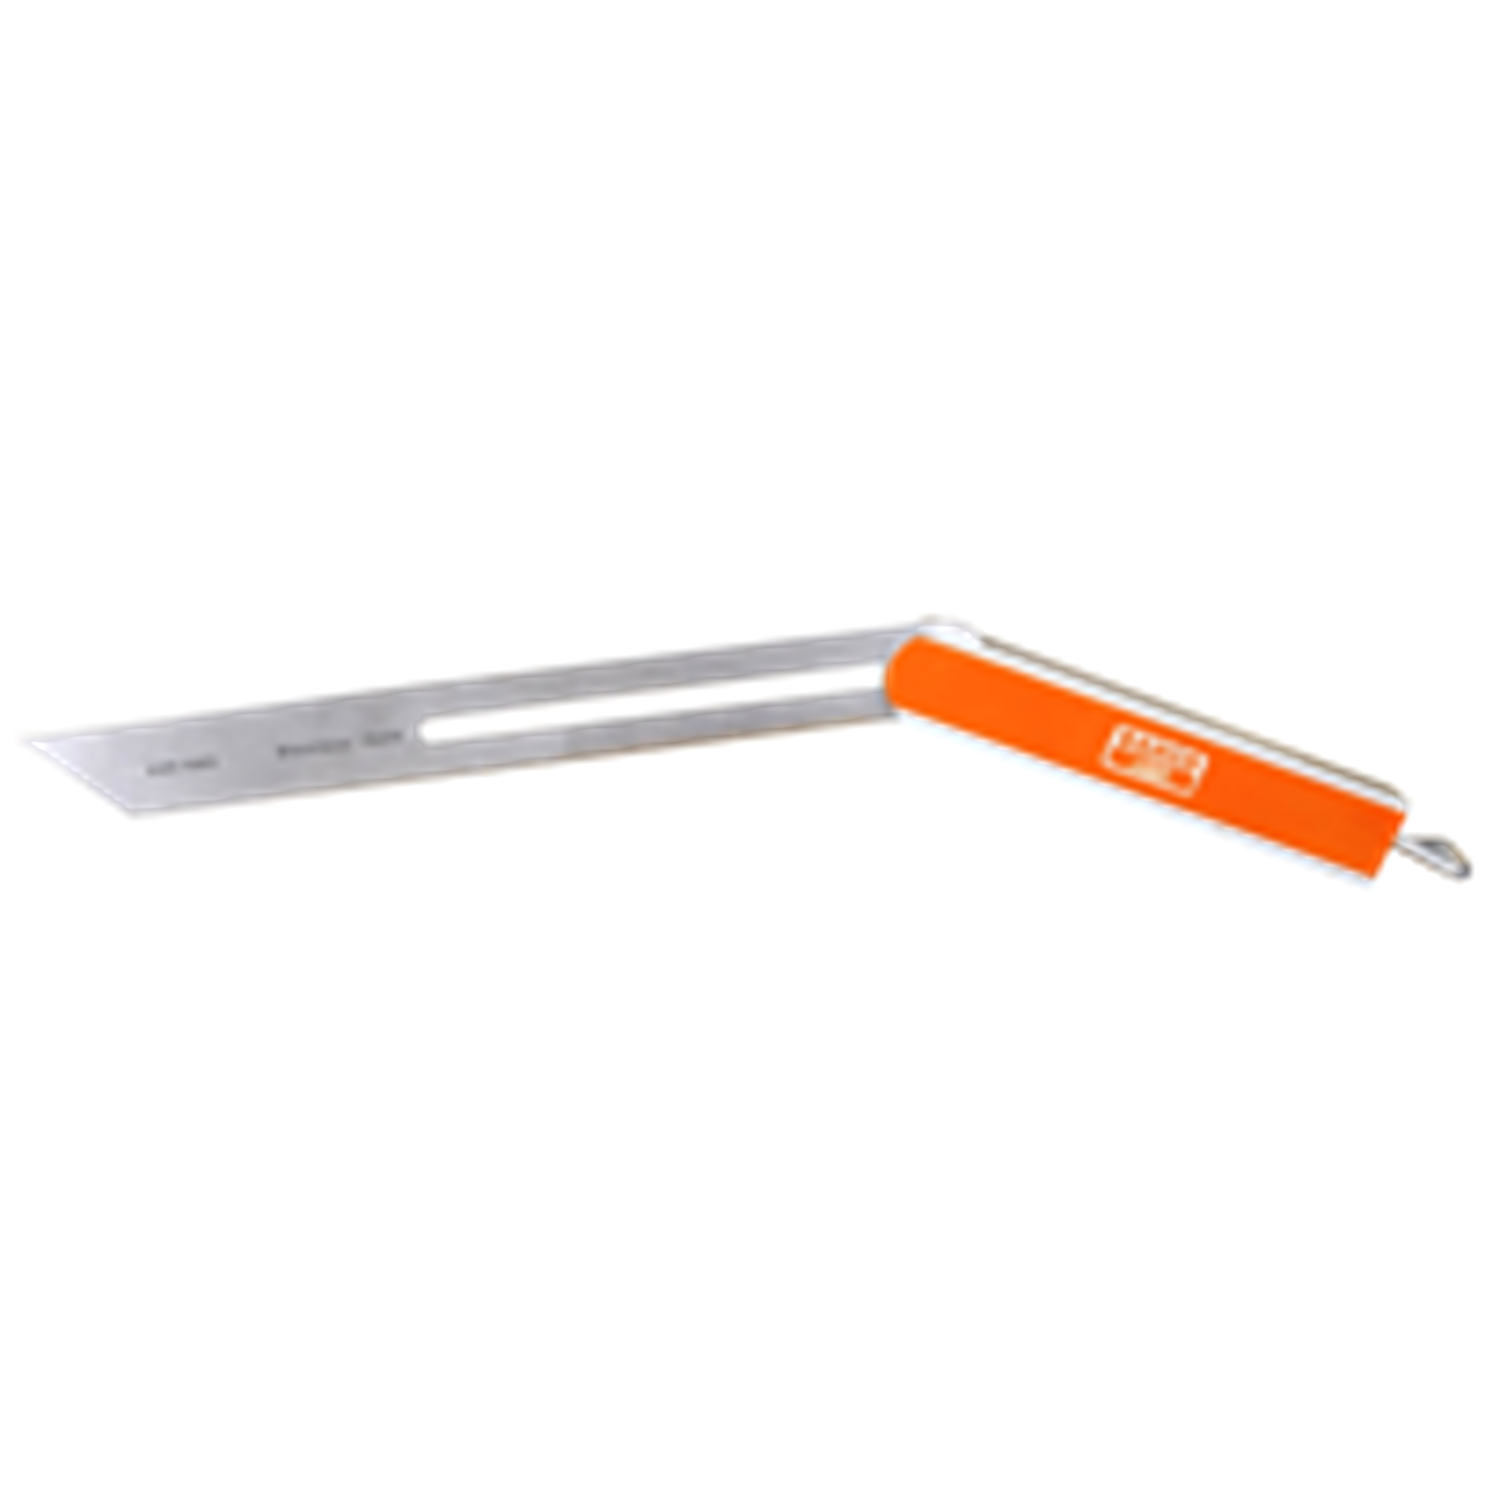 BAHCO 9574 Bevel Square with Steel Blade (BAHCO Tools) - Premium Bevel Square from BAHCO - Shop now at Yew Aik.